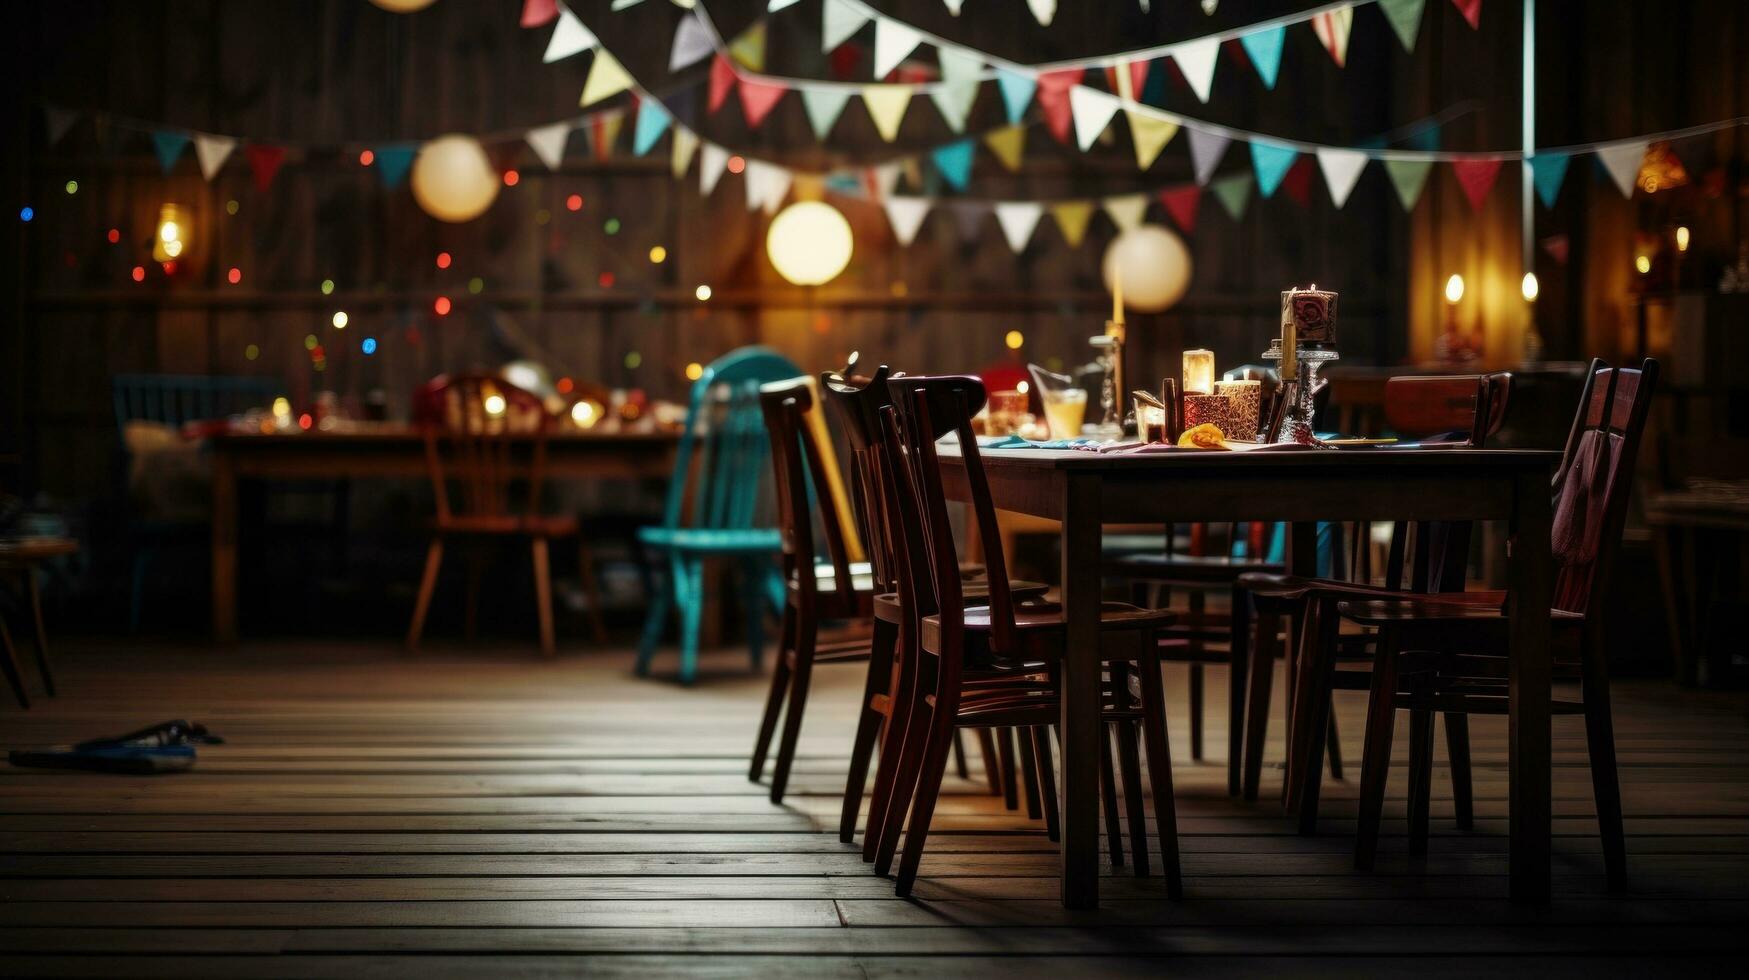 AI generated the floor of a wooden dining room with colourful bunting hanging over photo